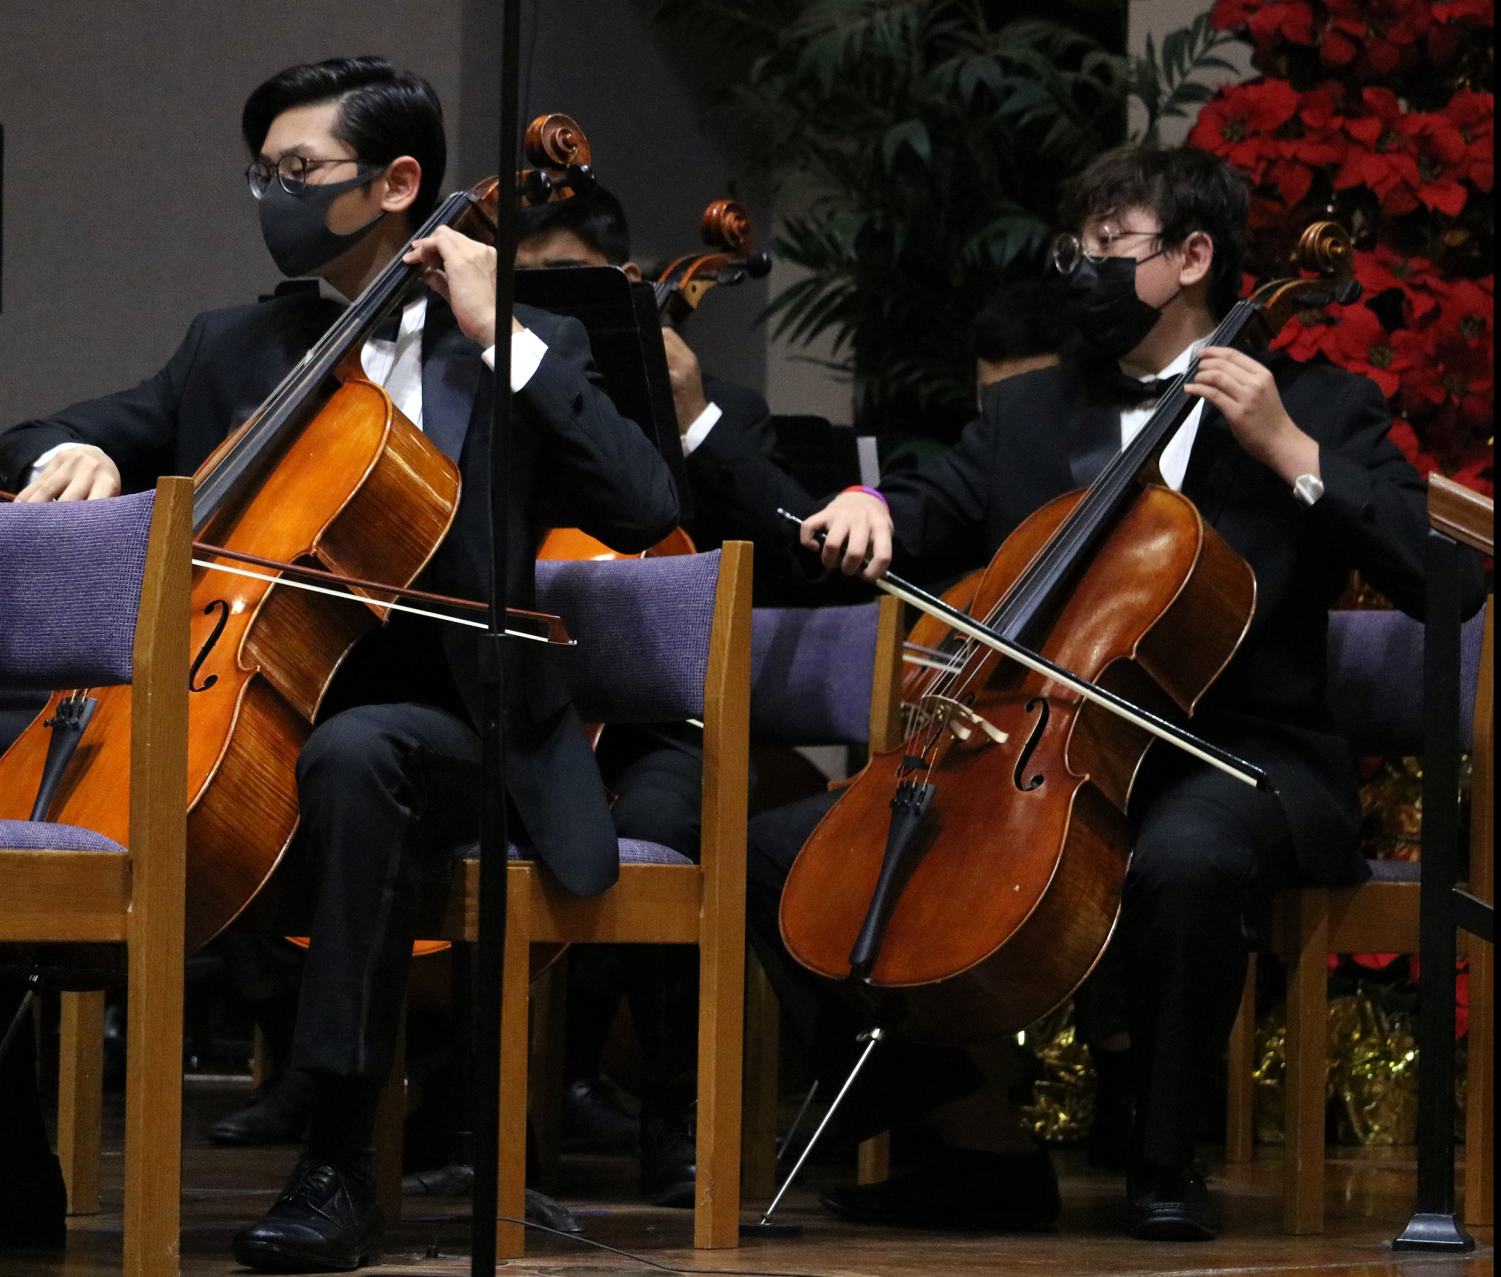 Orchestra+Amplifies+Holiday+Ambience+at+Winter+Concert+Performance